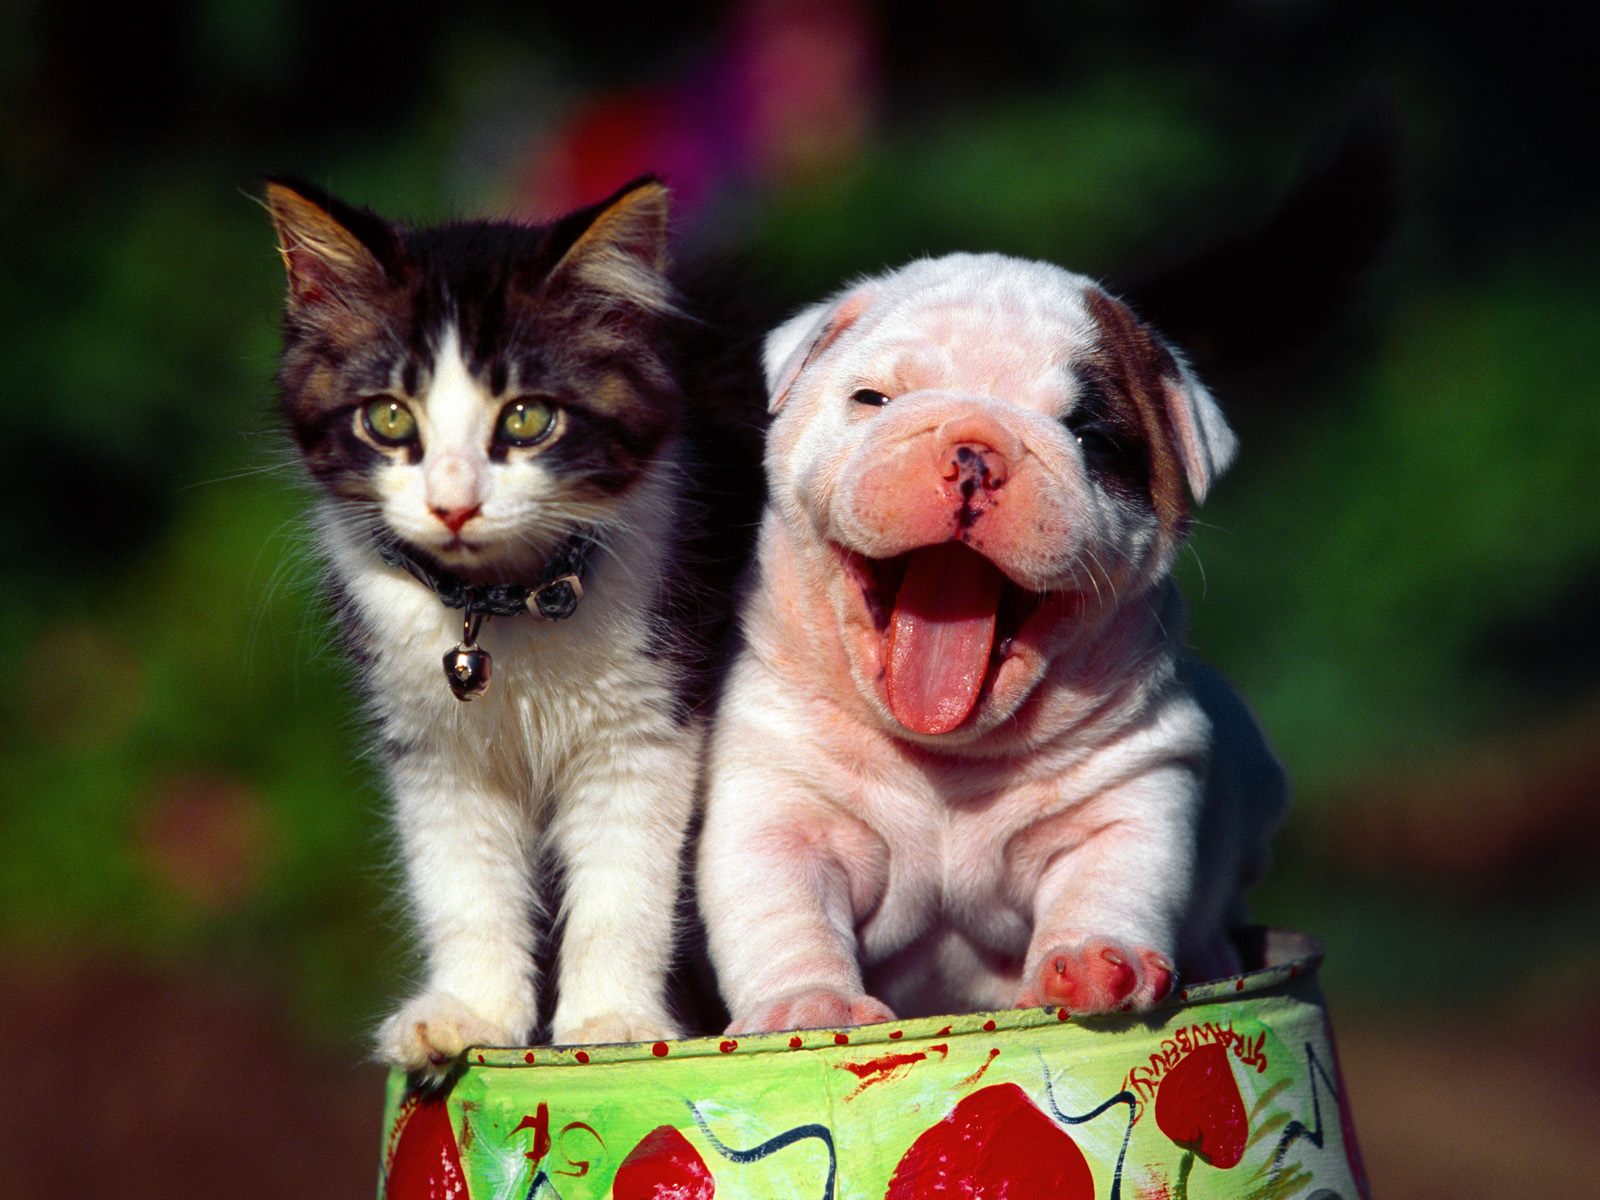 Dogs and Cats Wallpaper High Quality WallpapersWallpaper Desktop 1600x1200